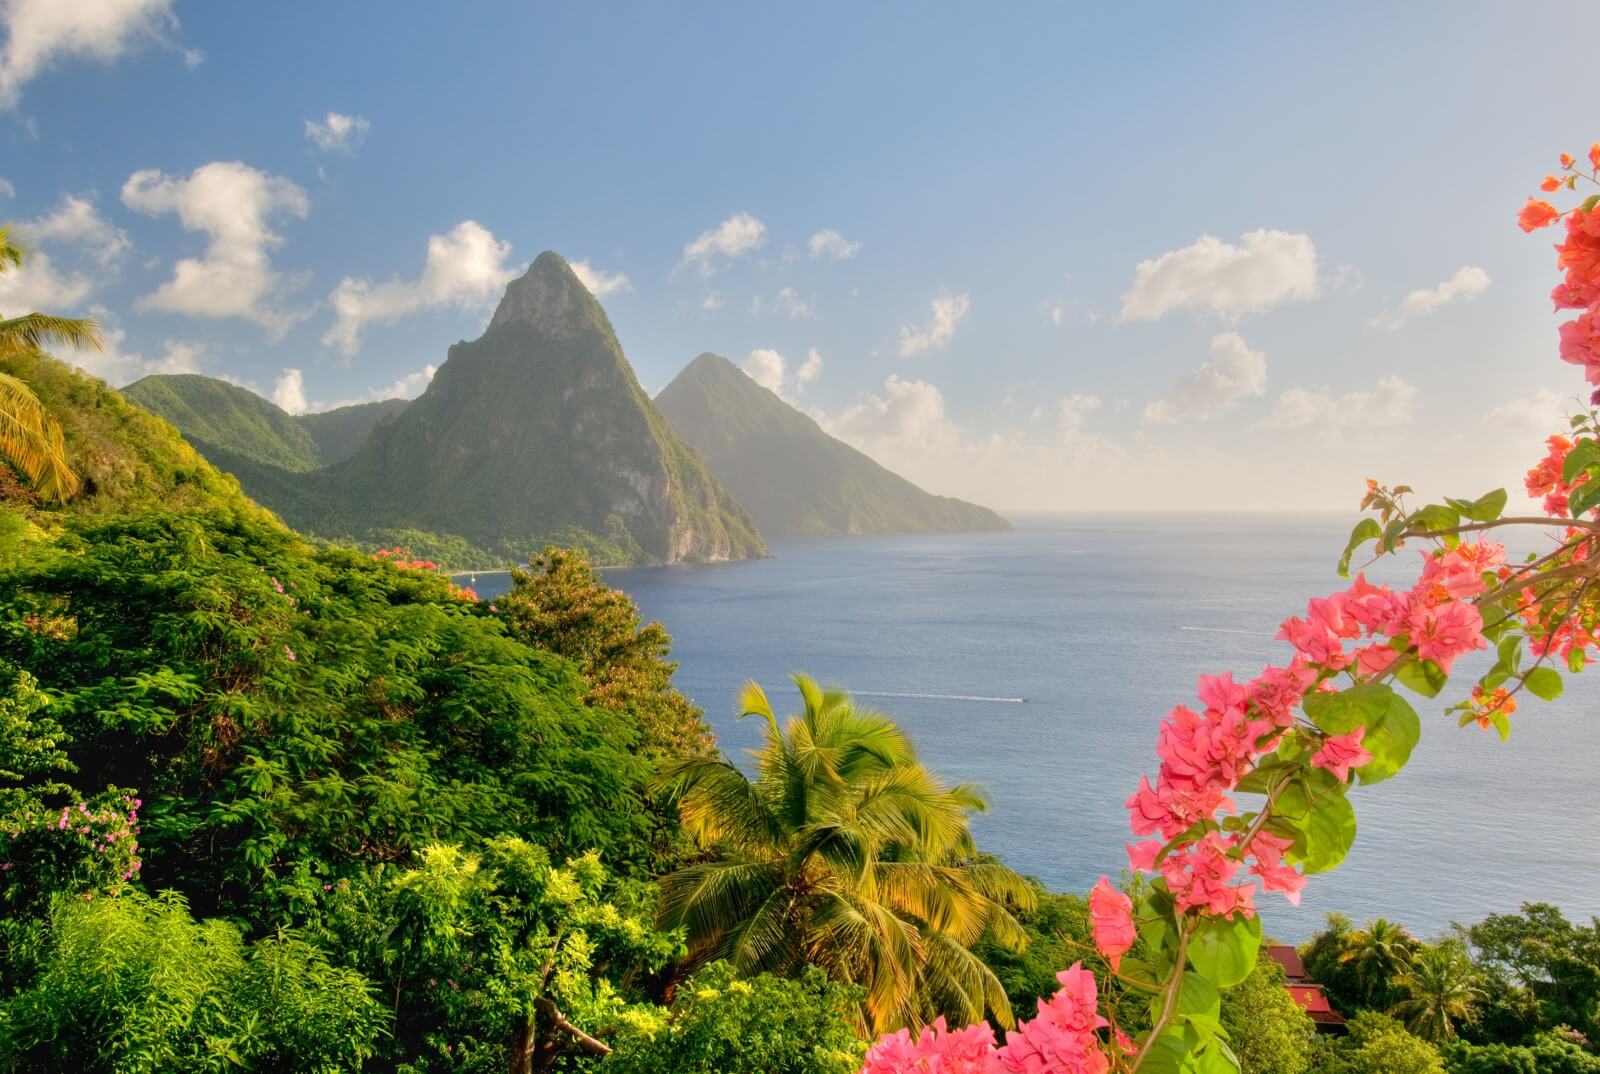 Scenic view of the Pitons, St Lucia.